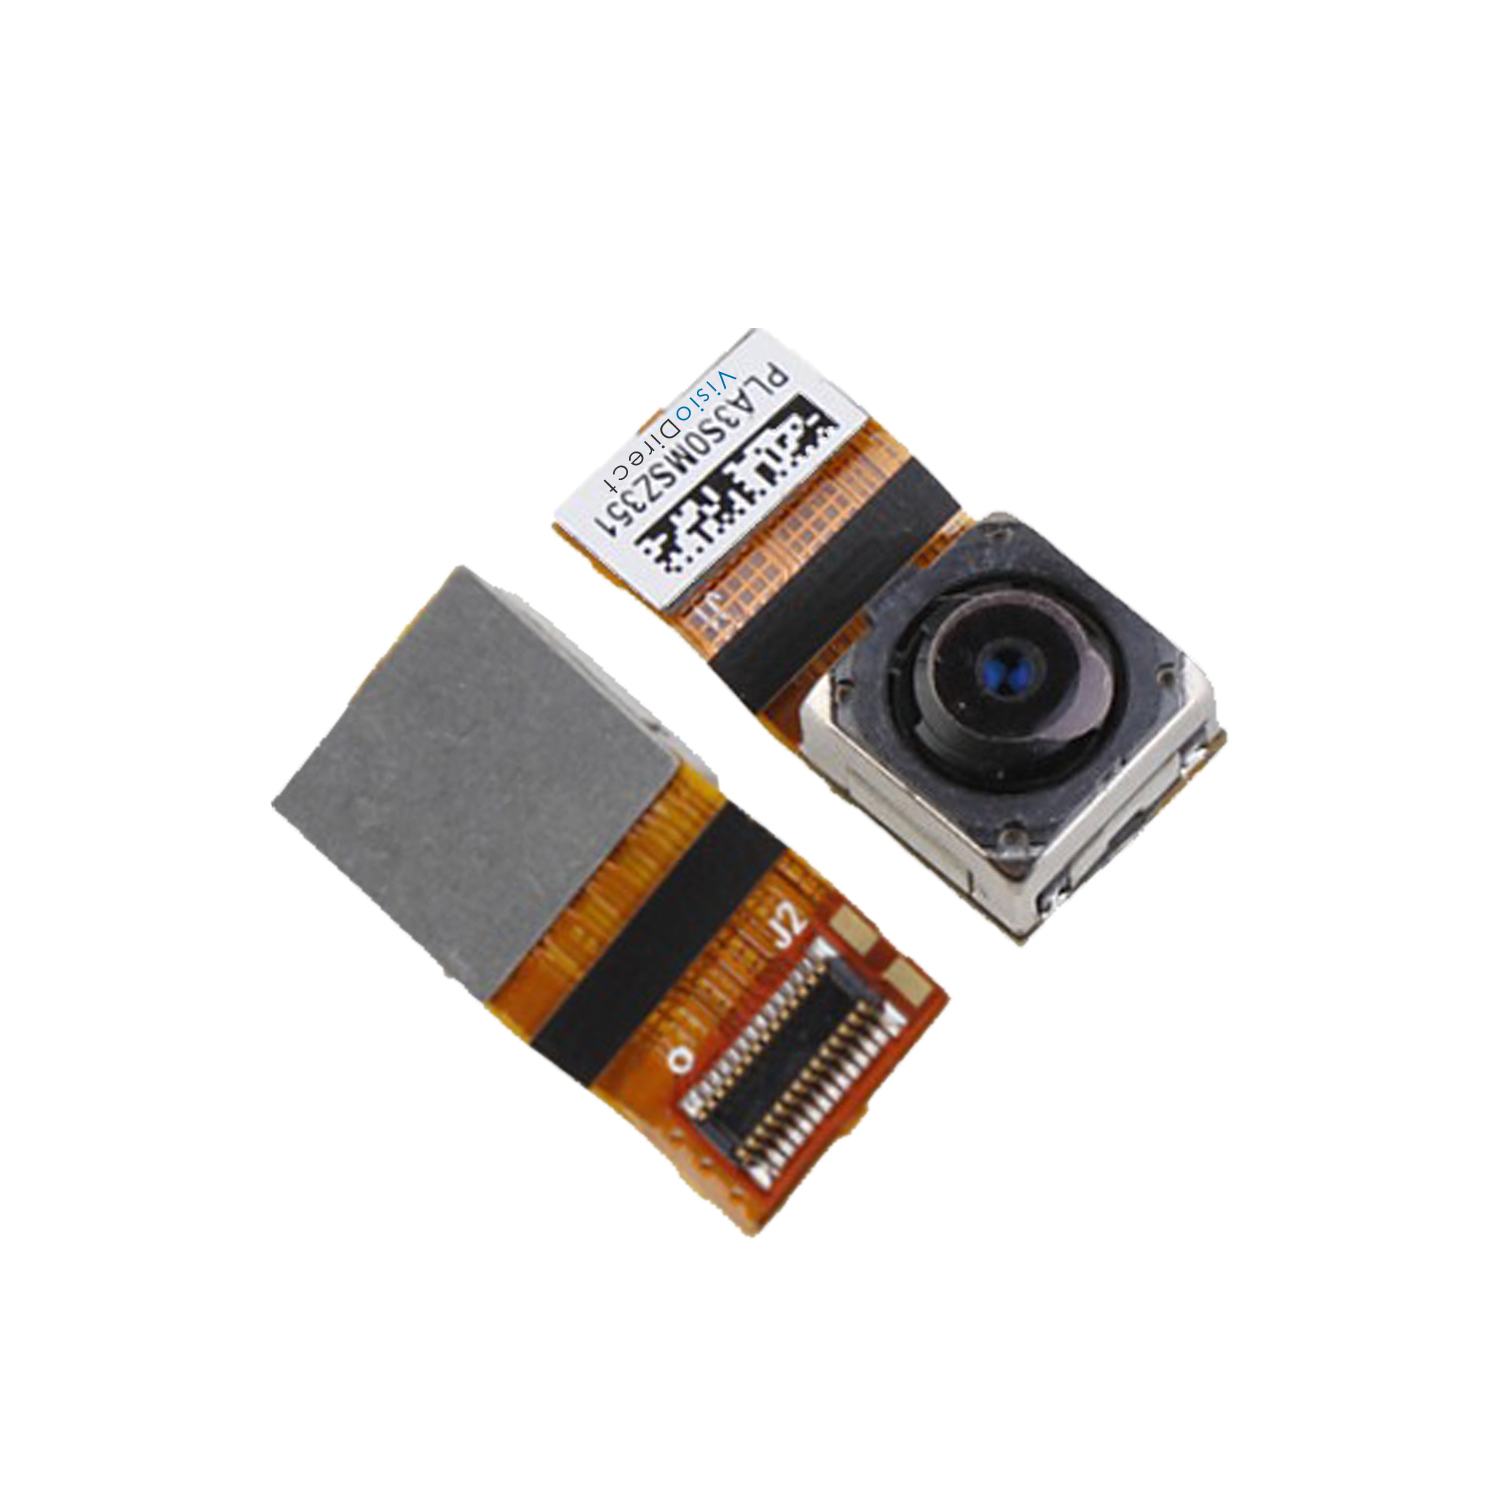 Camera pour iPhone 3GS -Visiod...